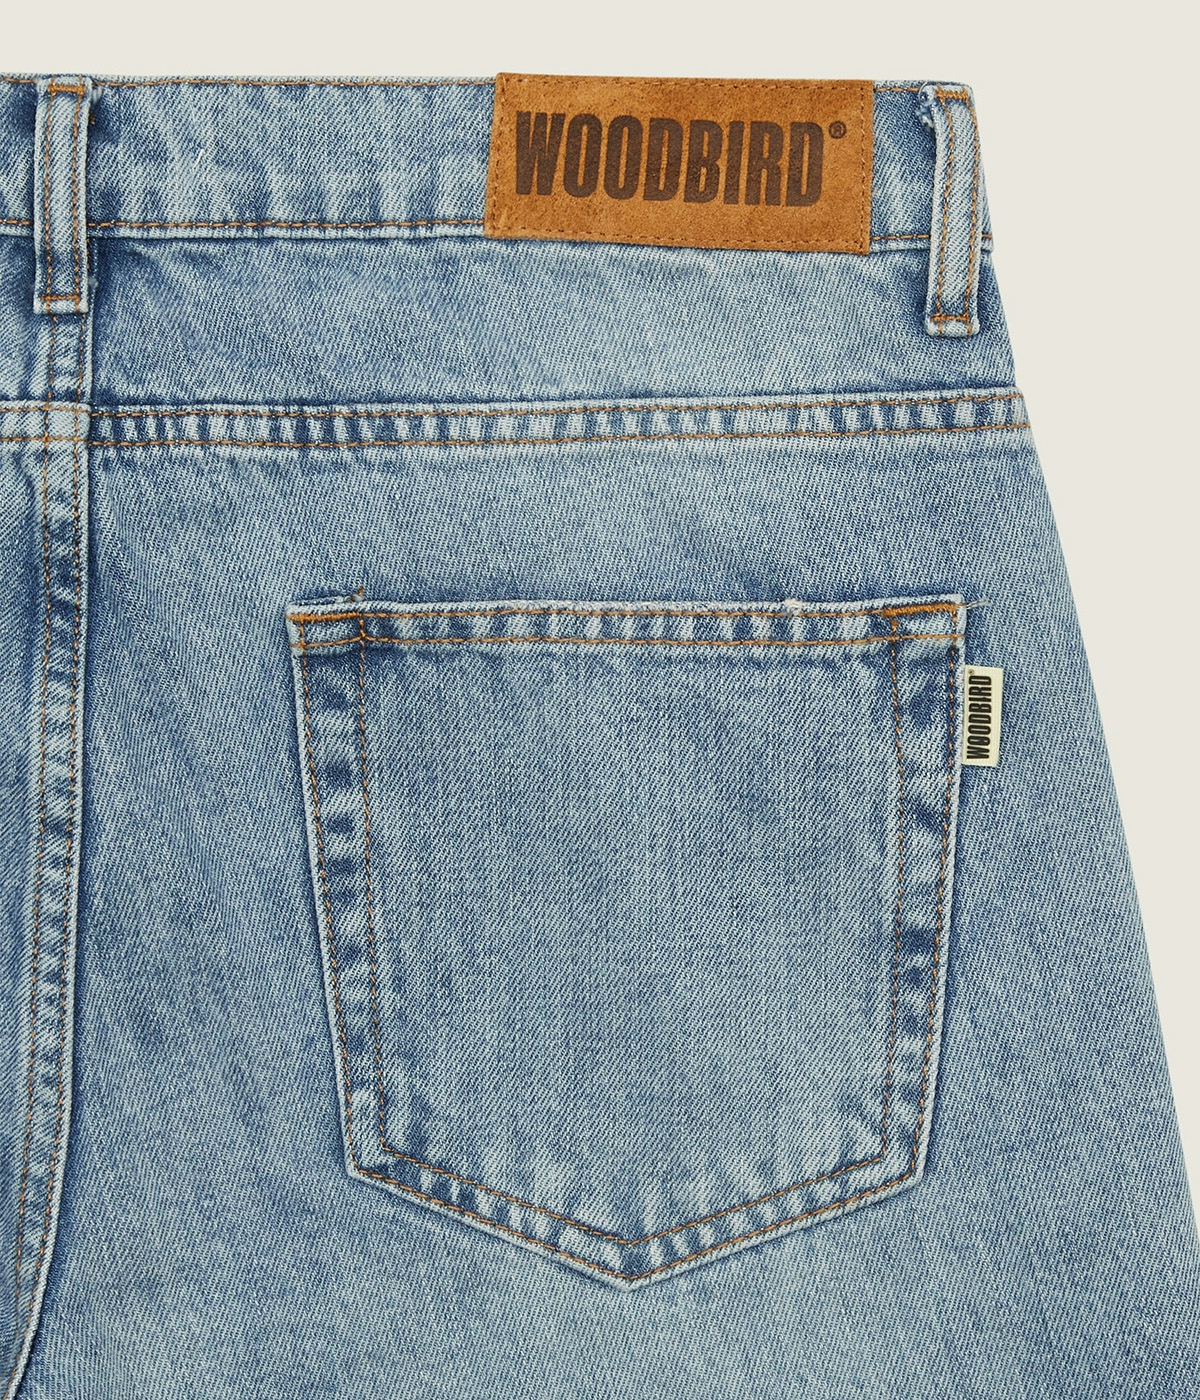 Woodbird Jeans Doc Doone Washed Blue 2